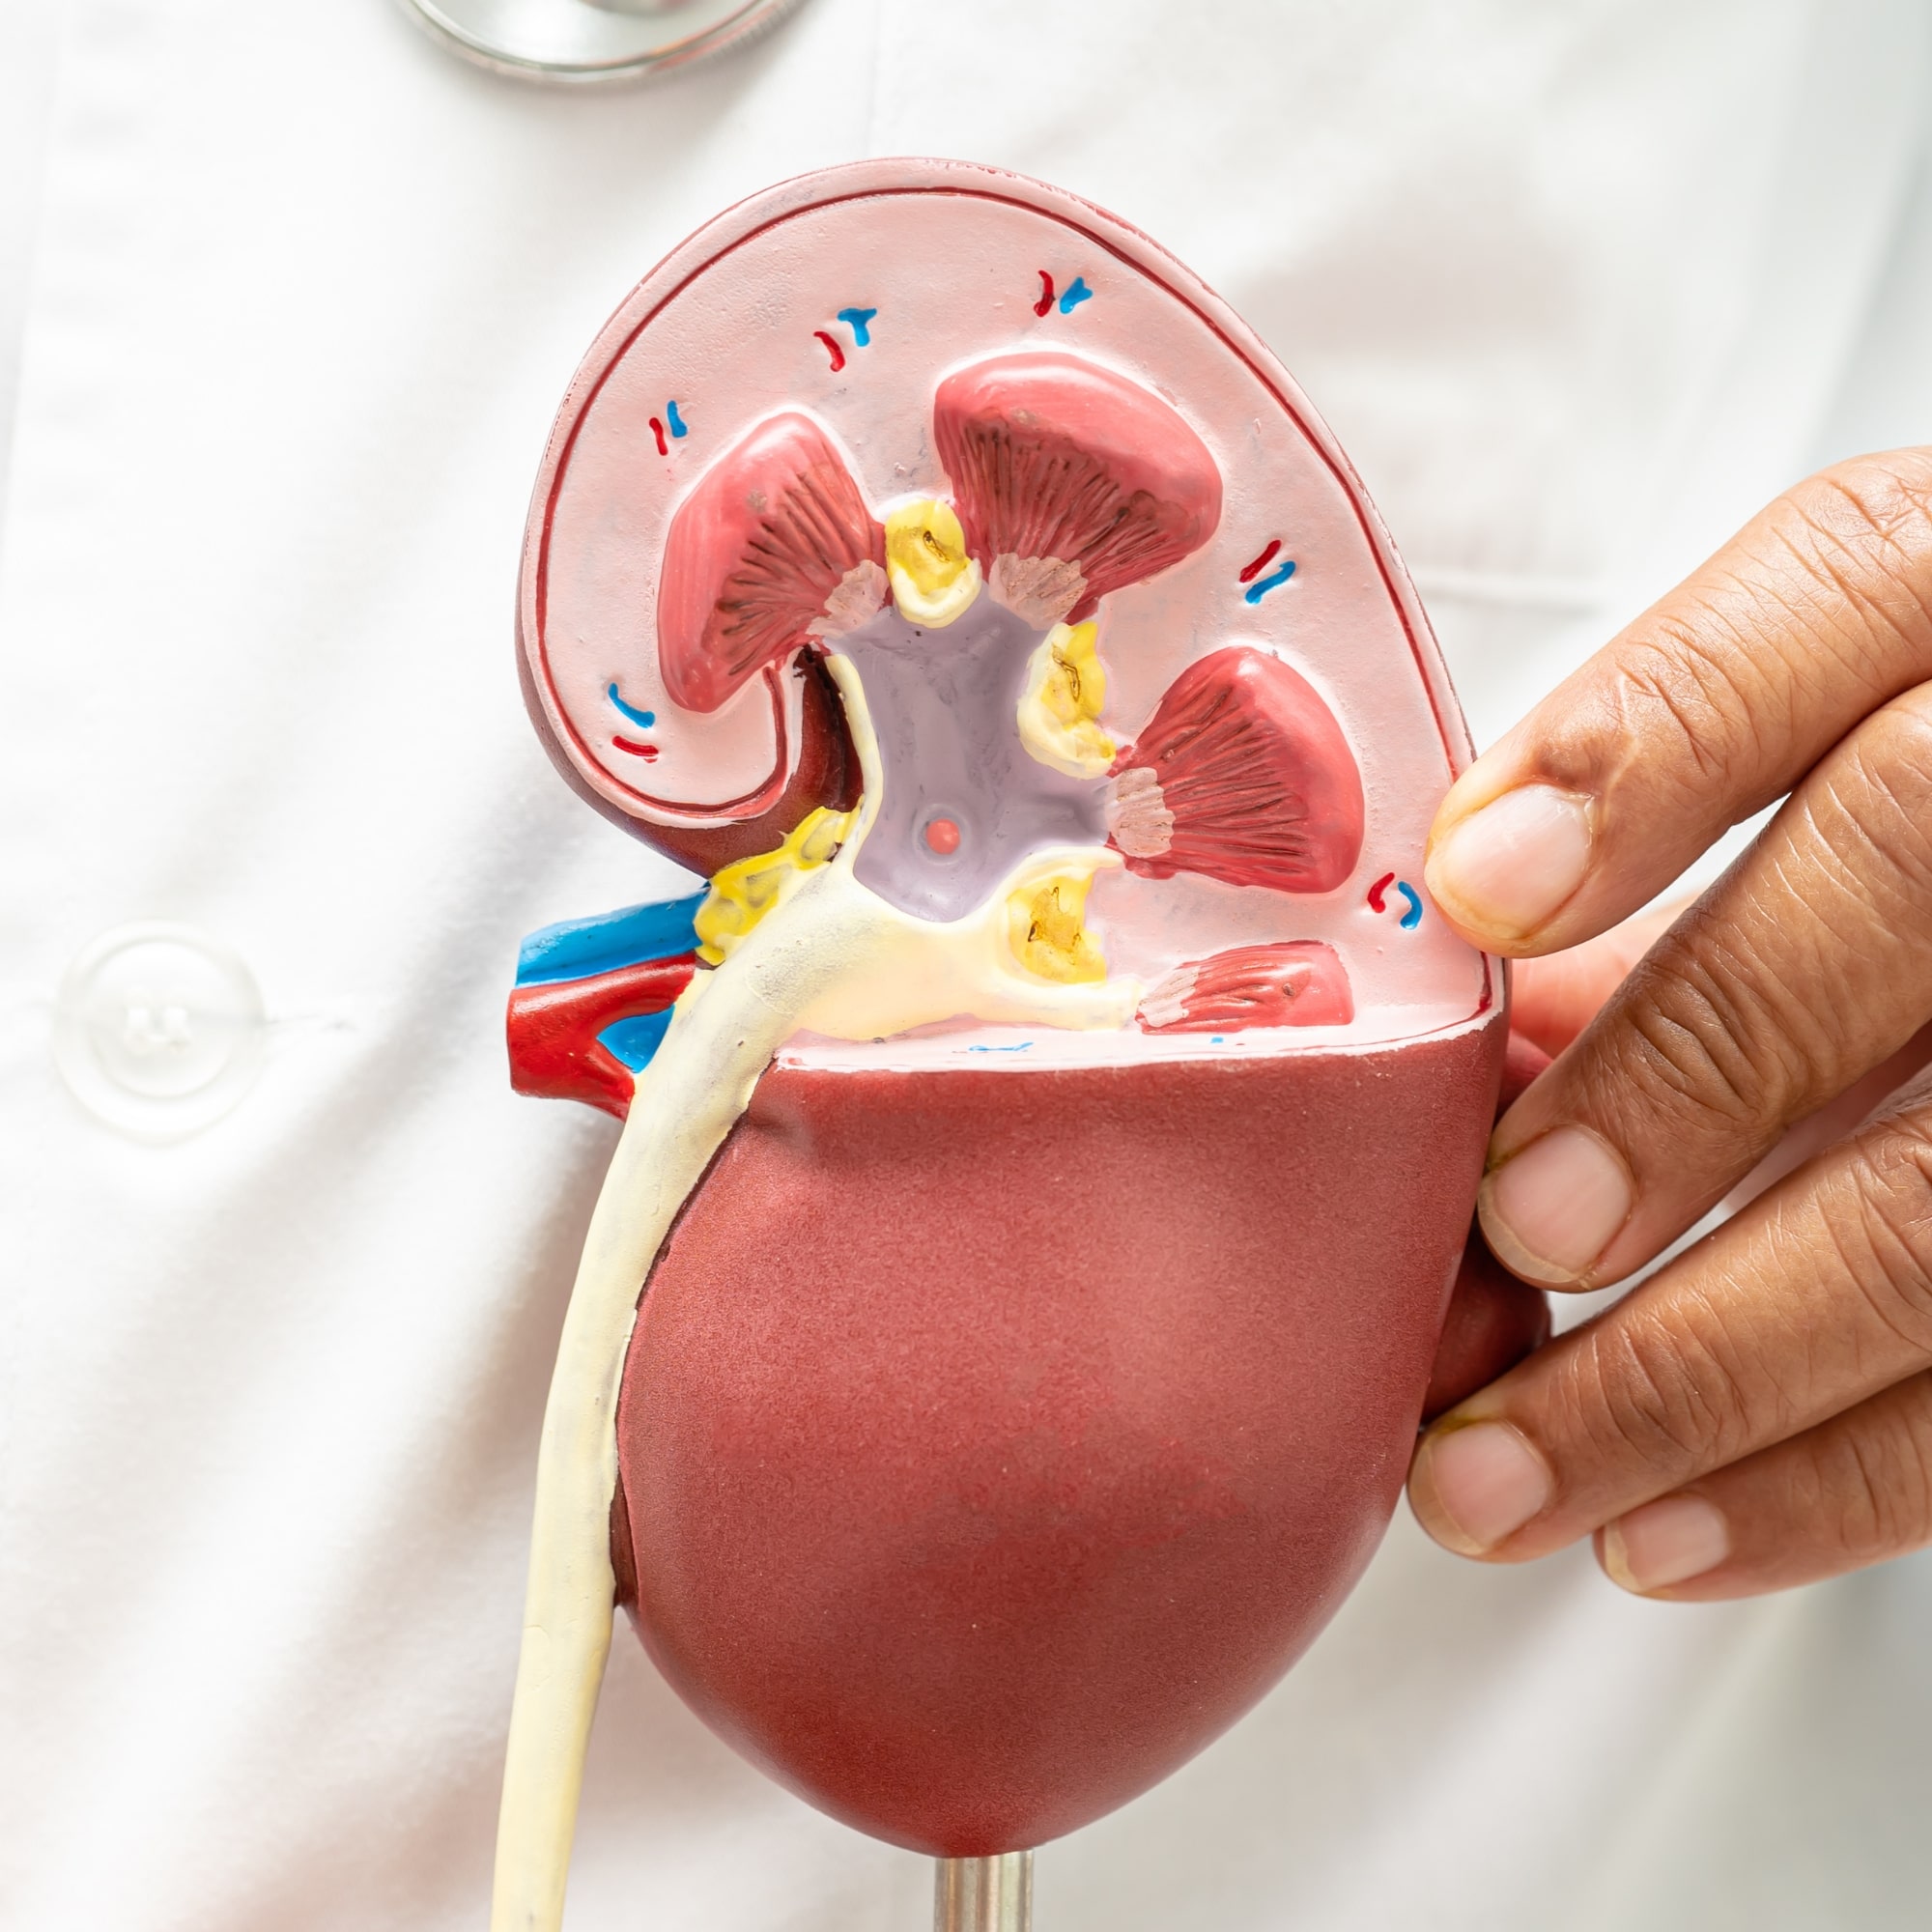 a doctor is holding a model of a human kidney